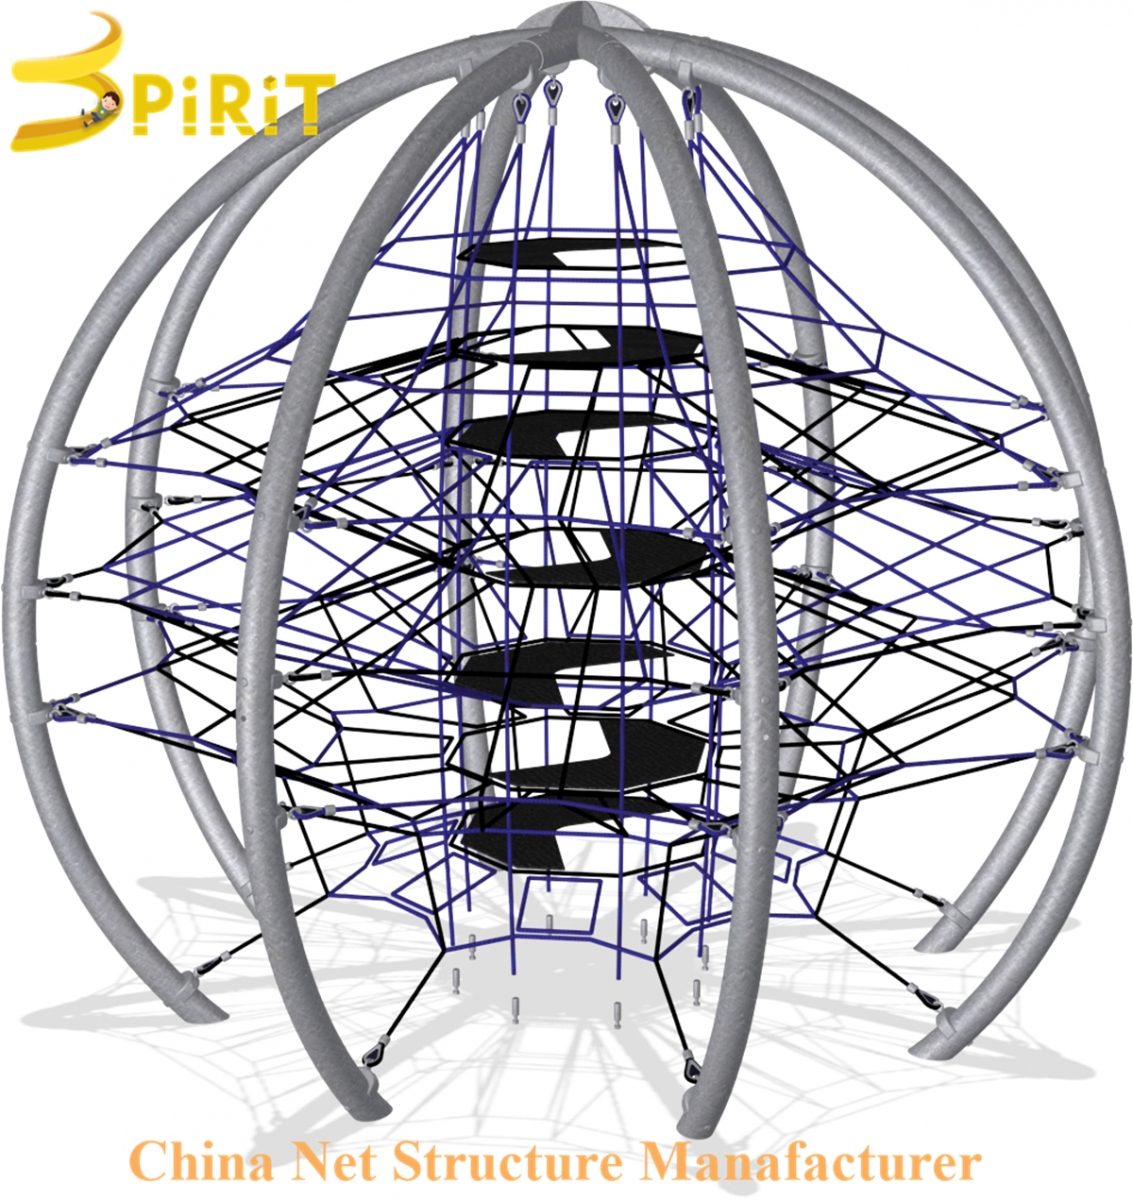 New custom competitive price Dome architecture for kids 6-12 years in outdoor play spaces.-SPIRIT PLAY,Outdoor Playground, Indoor Playground,Trampoline Park,Outdoor Fitness,Inflatable,Soft Playground,Ninja Warrior,Trampoline Park,Playground Structure,Play Structure,Outdoor Fitness,Water Park,Play System,Freestanding,Interactive,independente ,Inklusibo, Park, Pagsaka sa Bungbong, Dula sa Bata